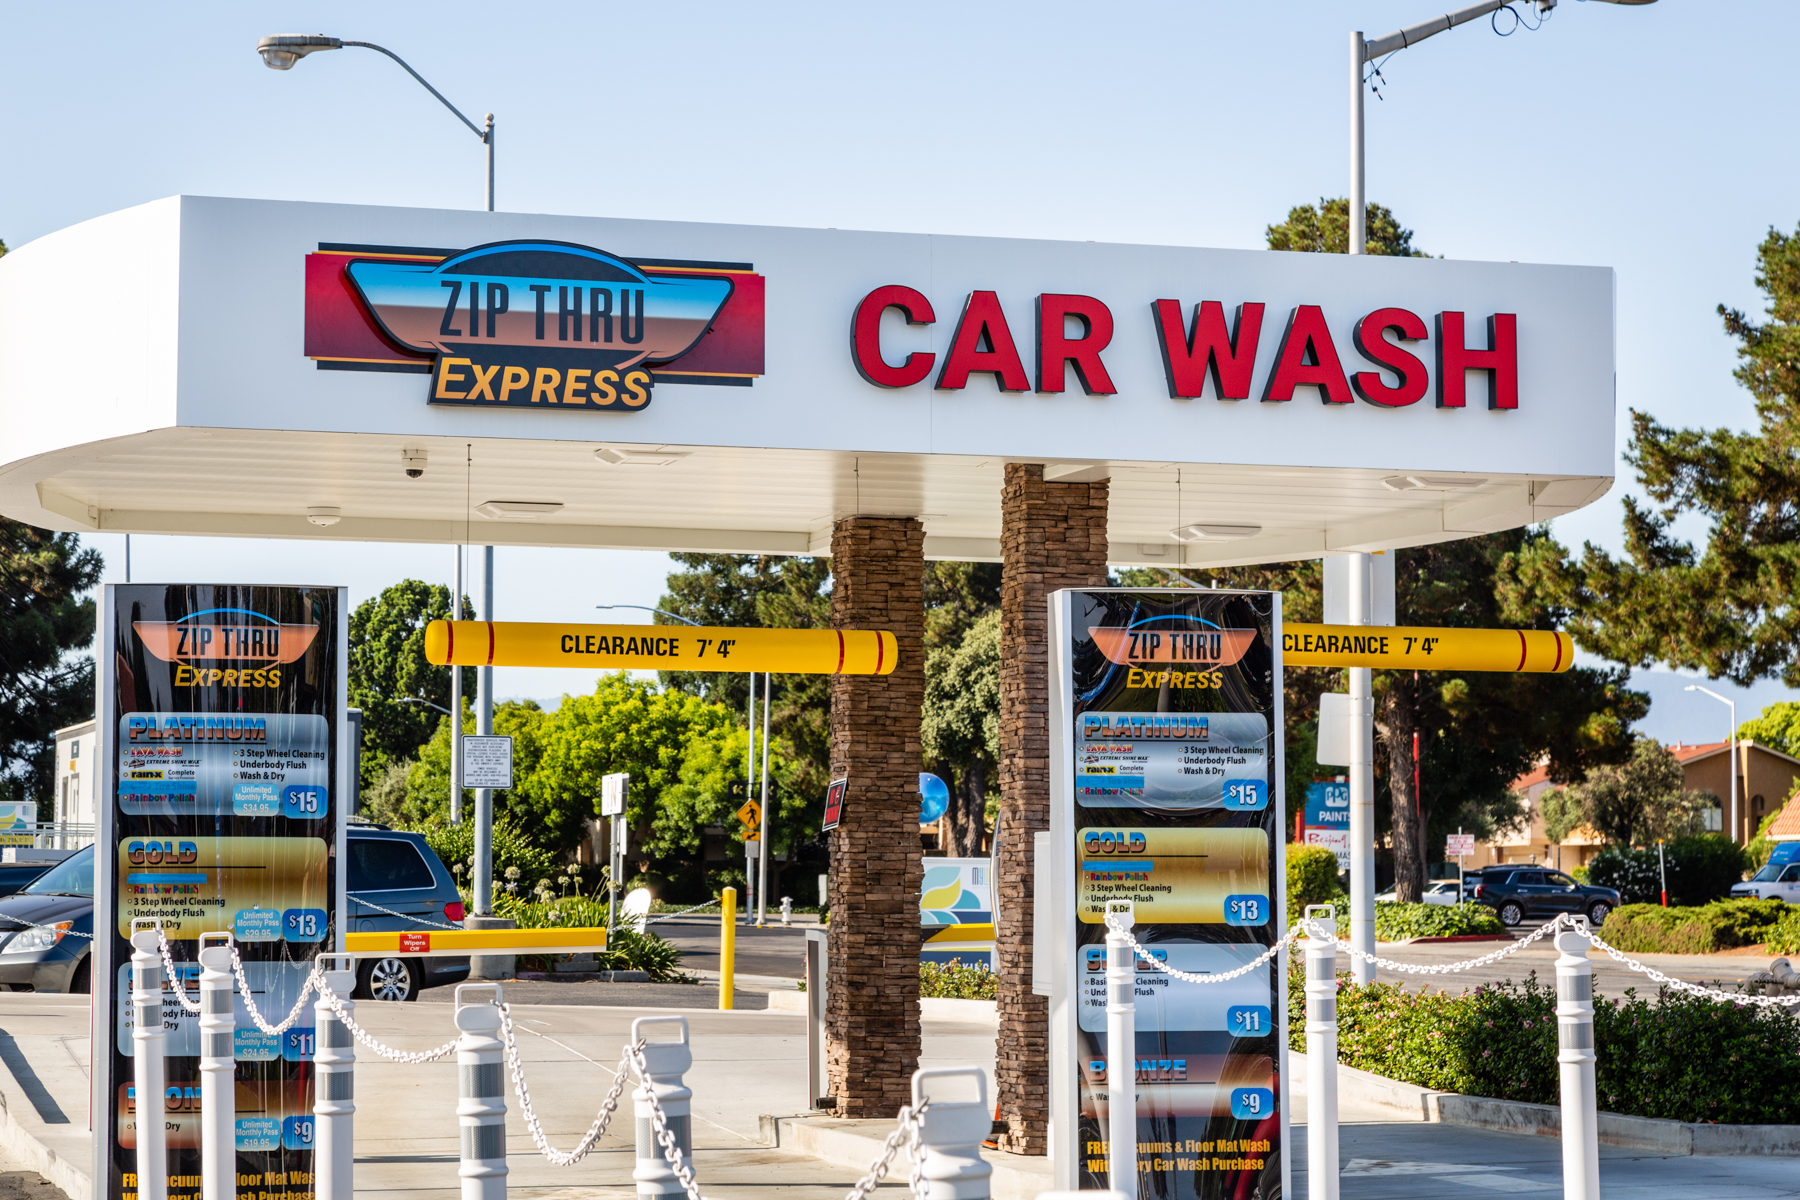 Zip Thru Express Car Wash - Free wash for first time customer - ask attendant